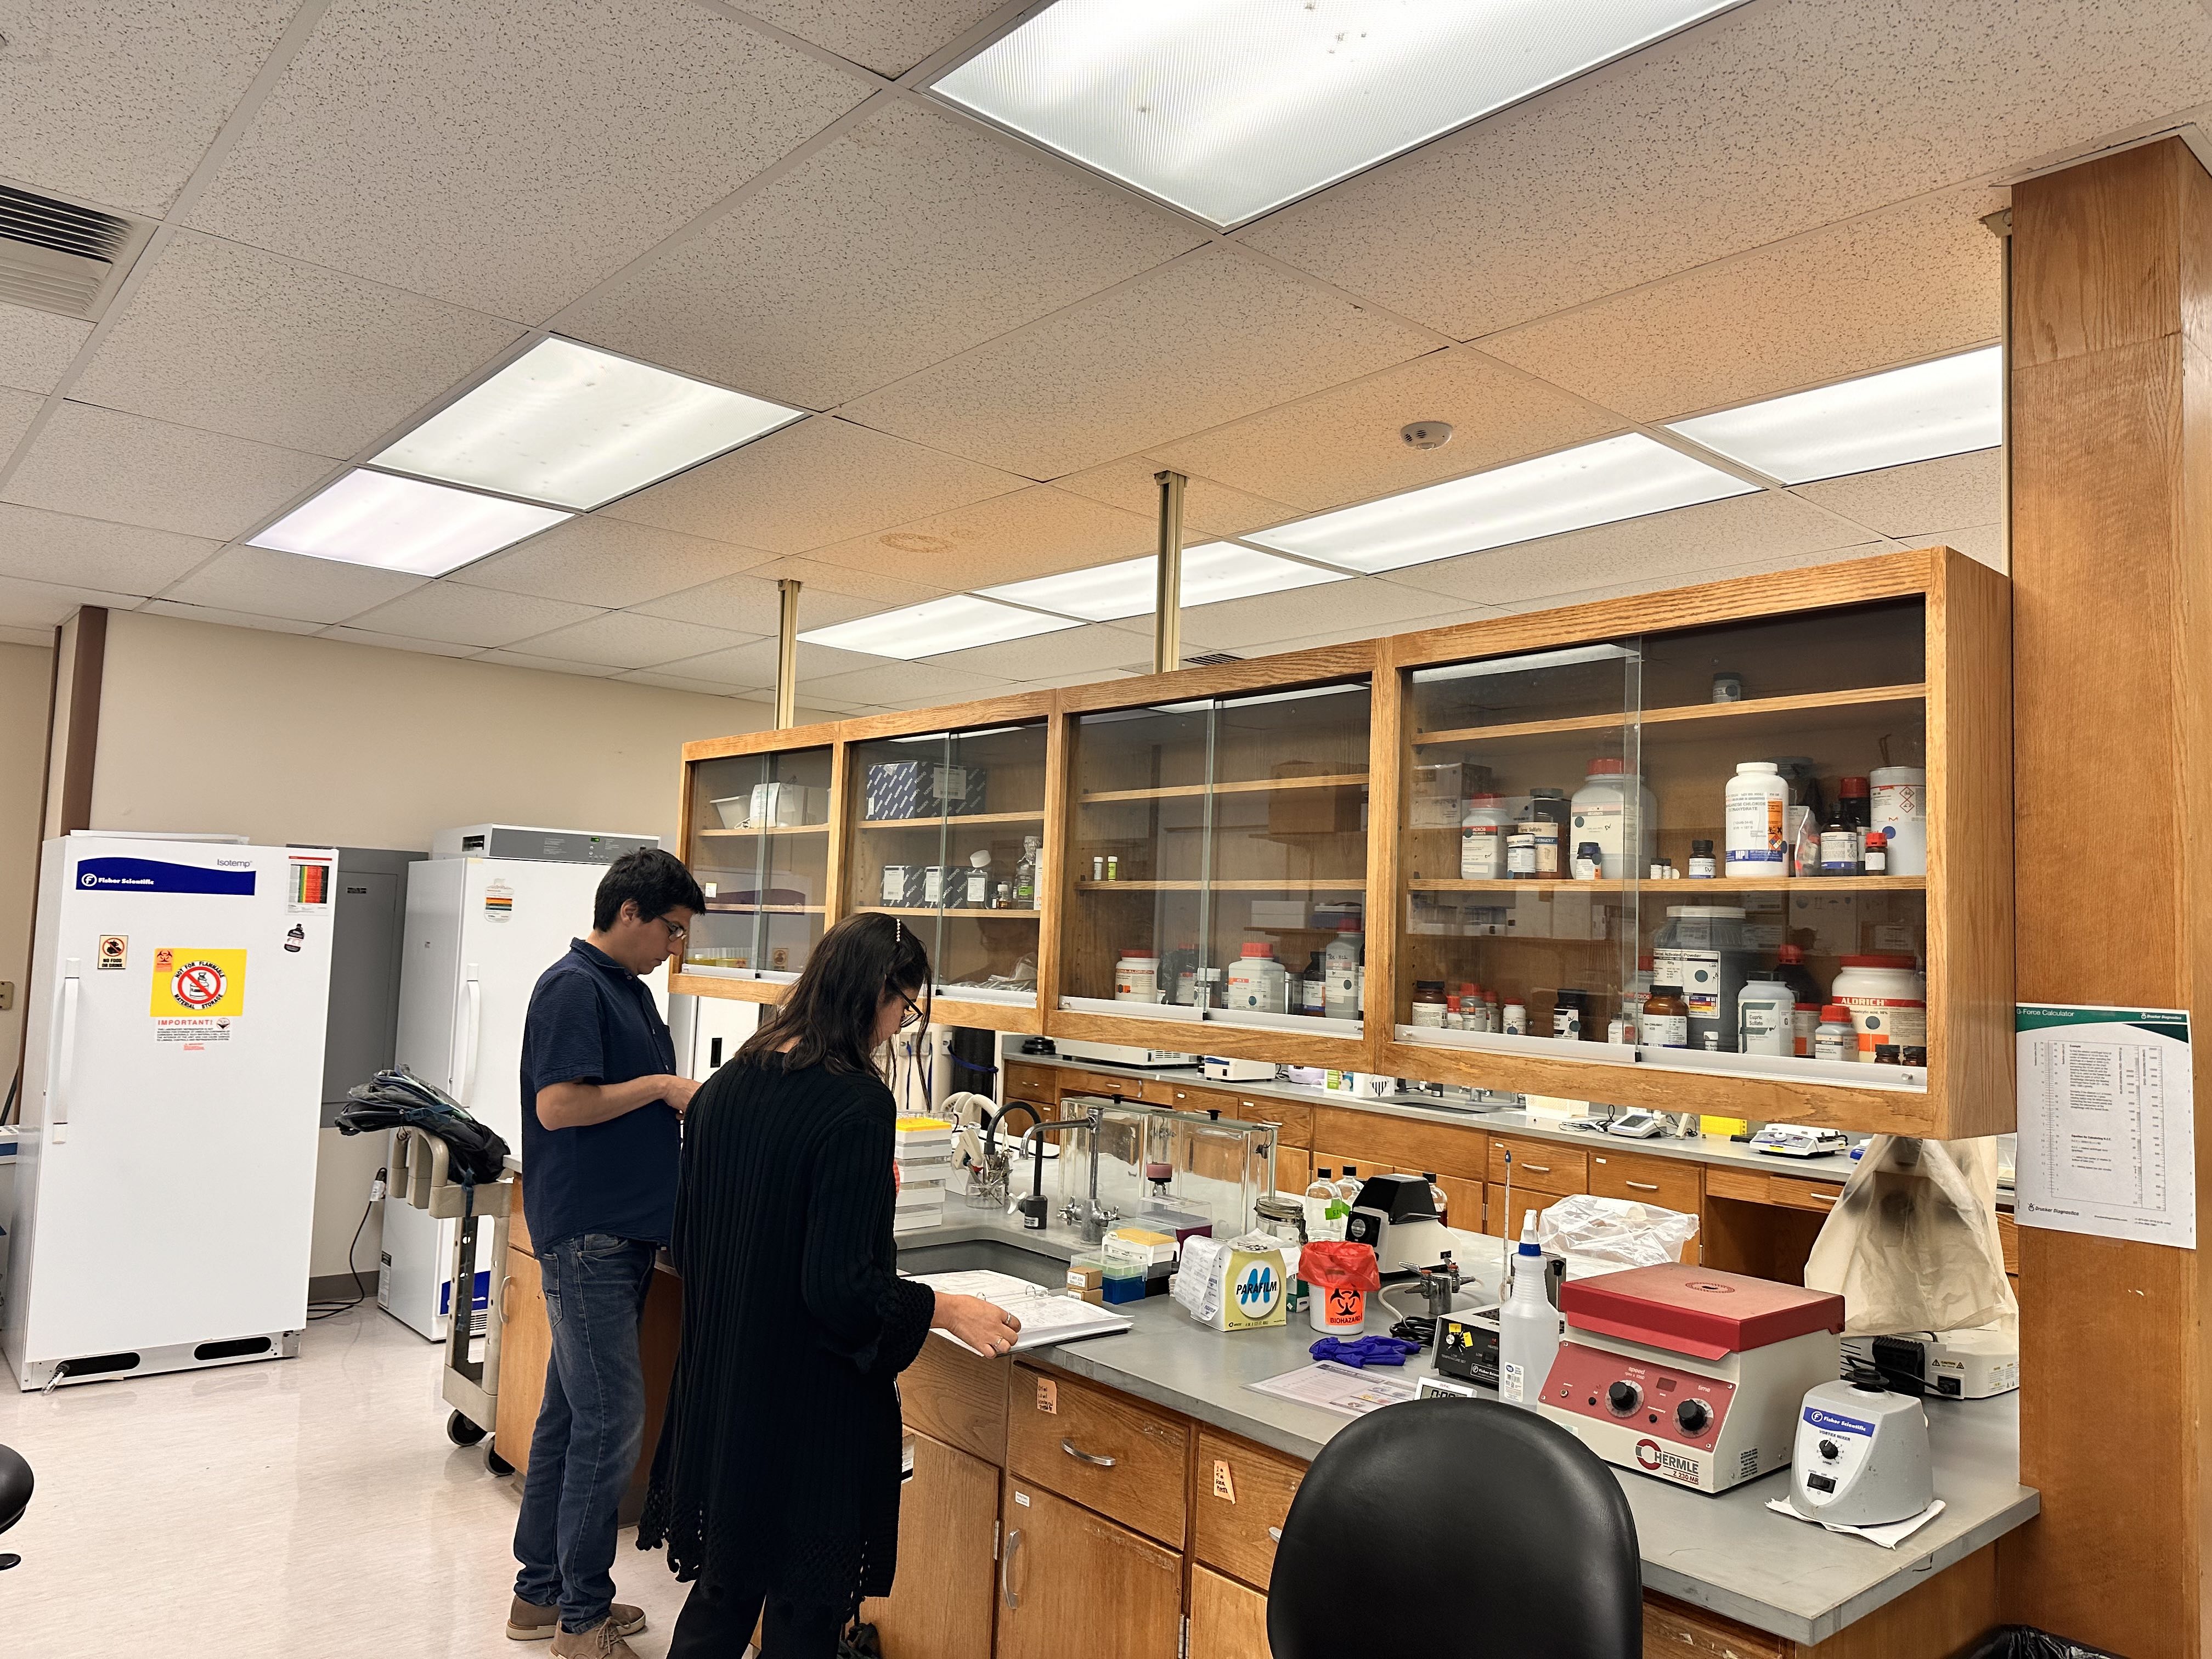 Researchers Oscar Avalos Ovando and Veronica Bahamondes Lorca review notes in OHIO's Edison Biotechnology Institute.